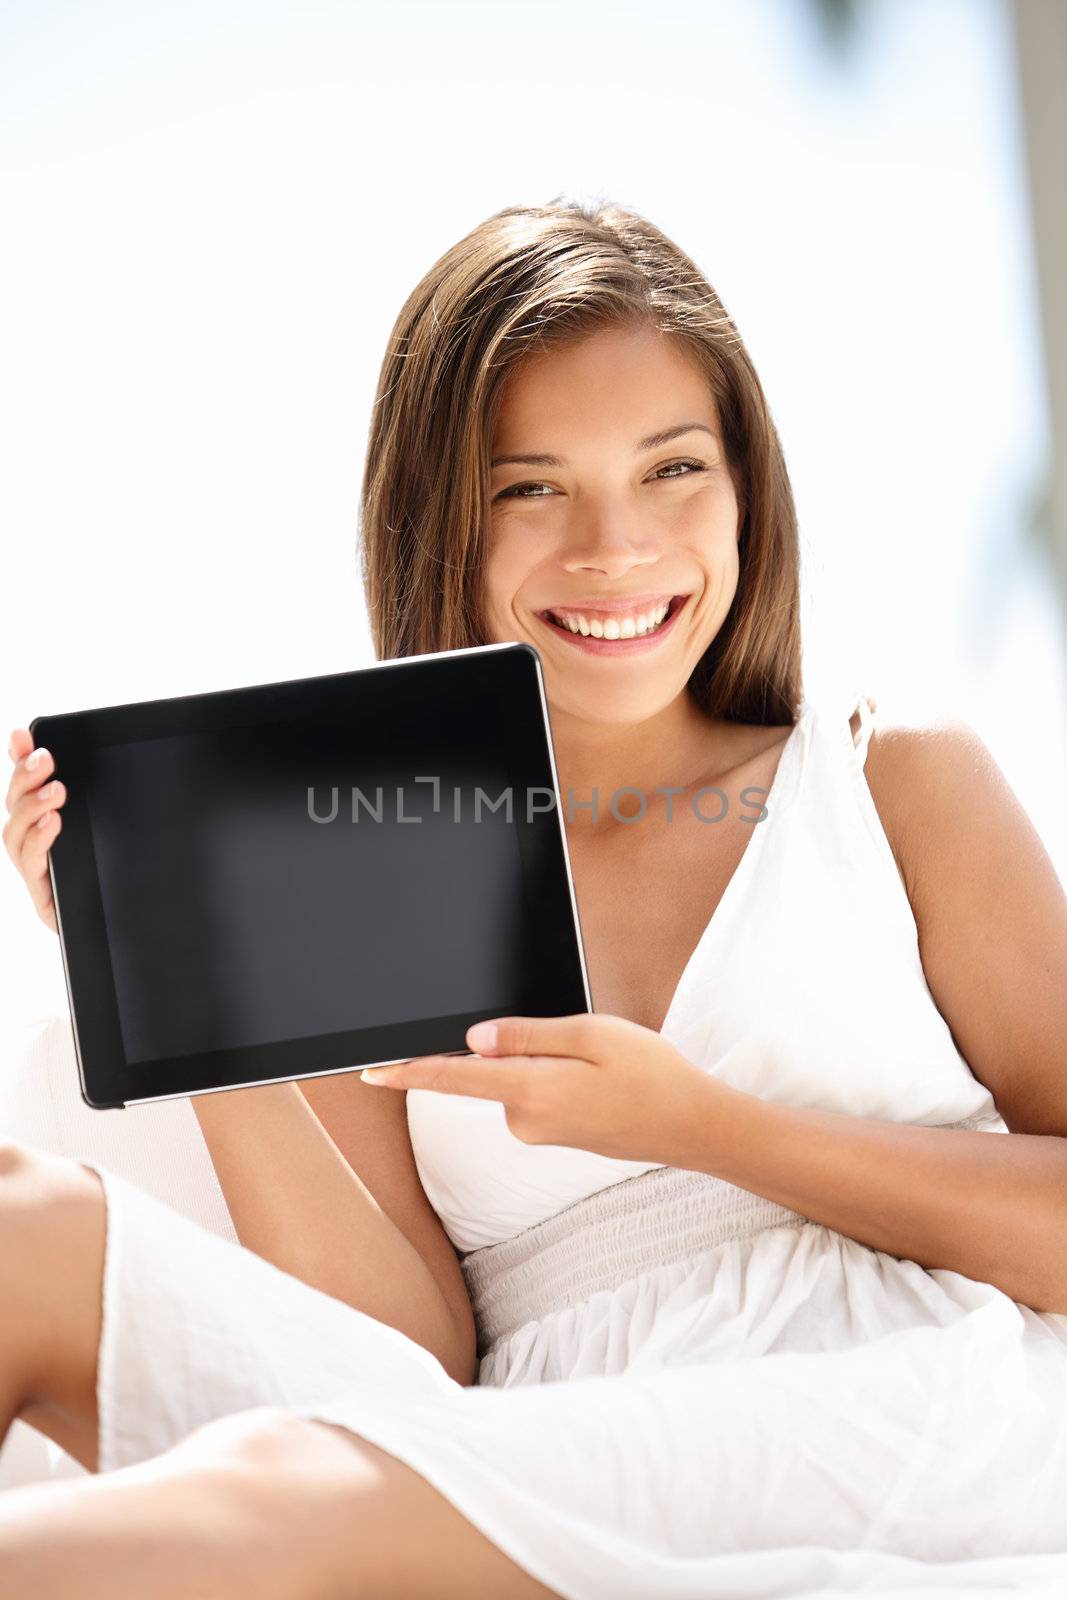 Tablet pc computer woman smiling happy. Person holding showing blank tablet computer touch screen sitting outdoors in luxury setting. Beautiful joyful mixed race Asian Cauasian female model outside.